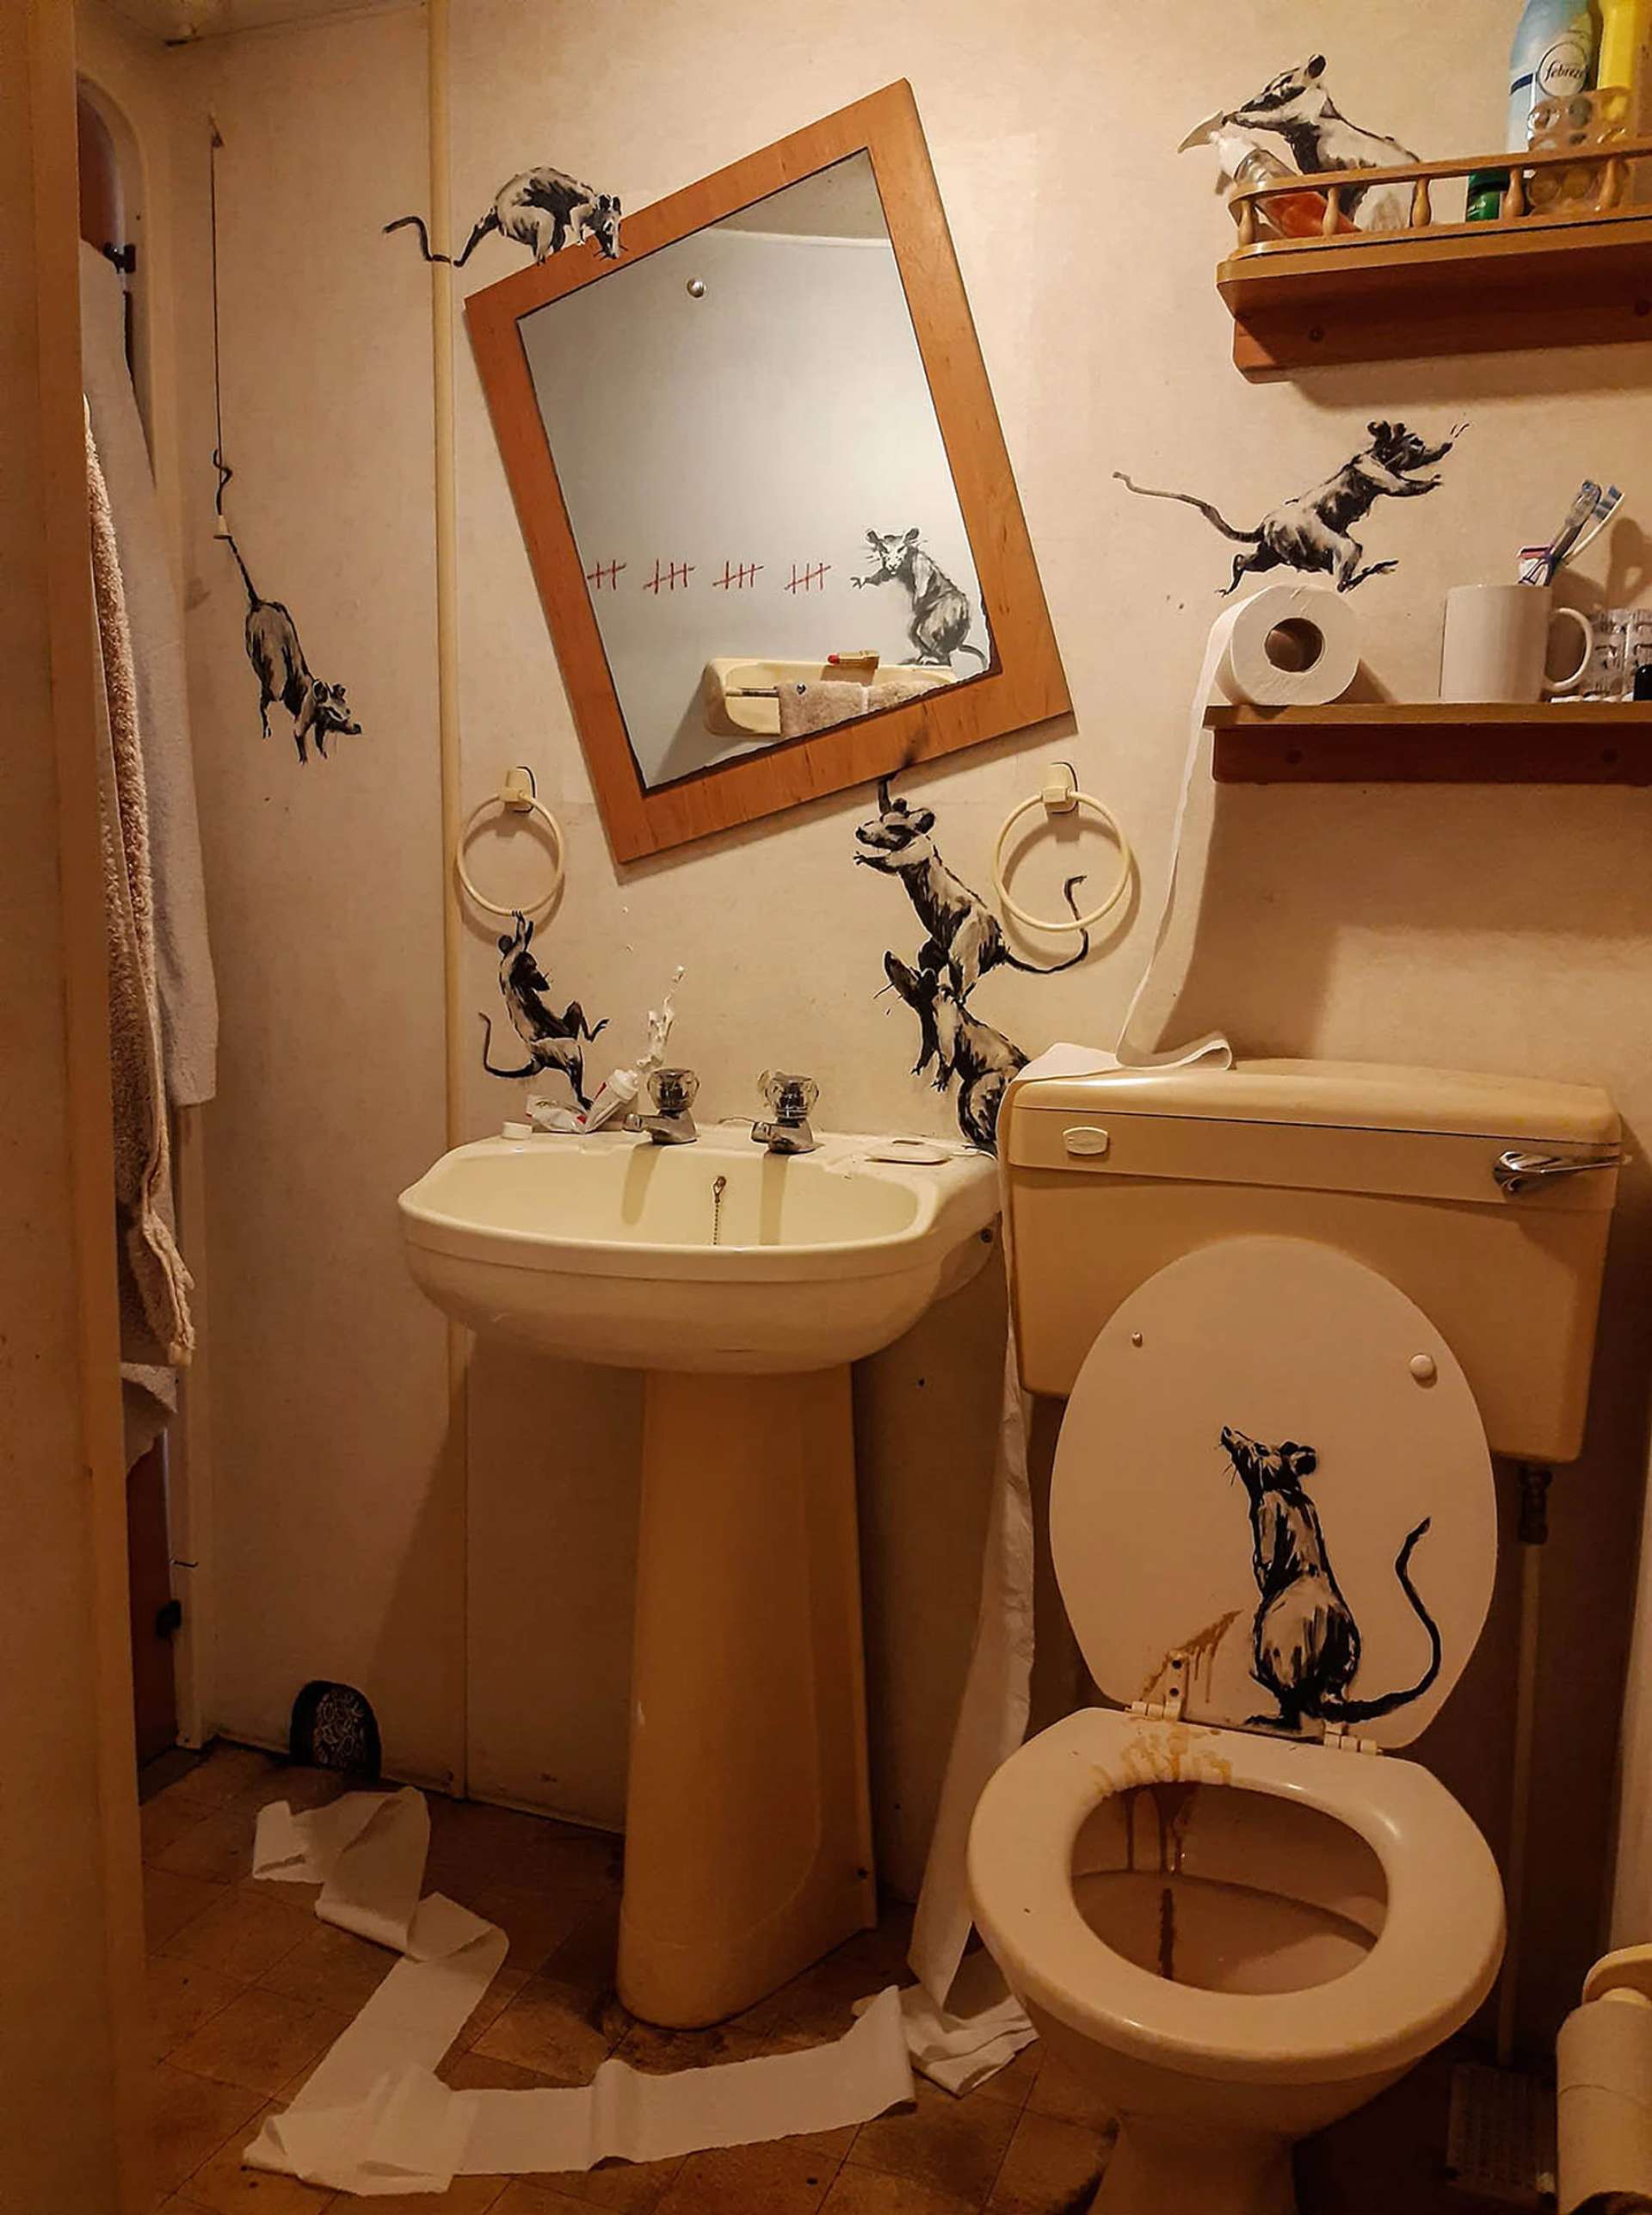 'My wife hates it when I work from home', Rats Bathroom Installation by Bansky